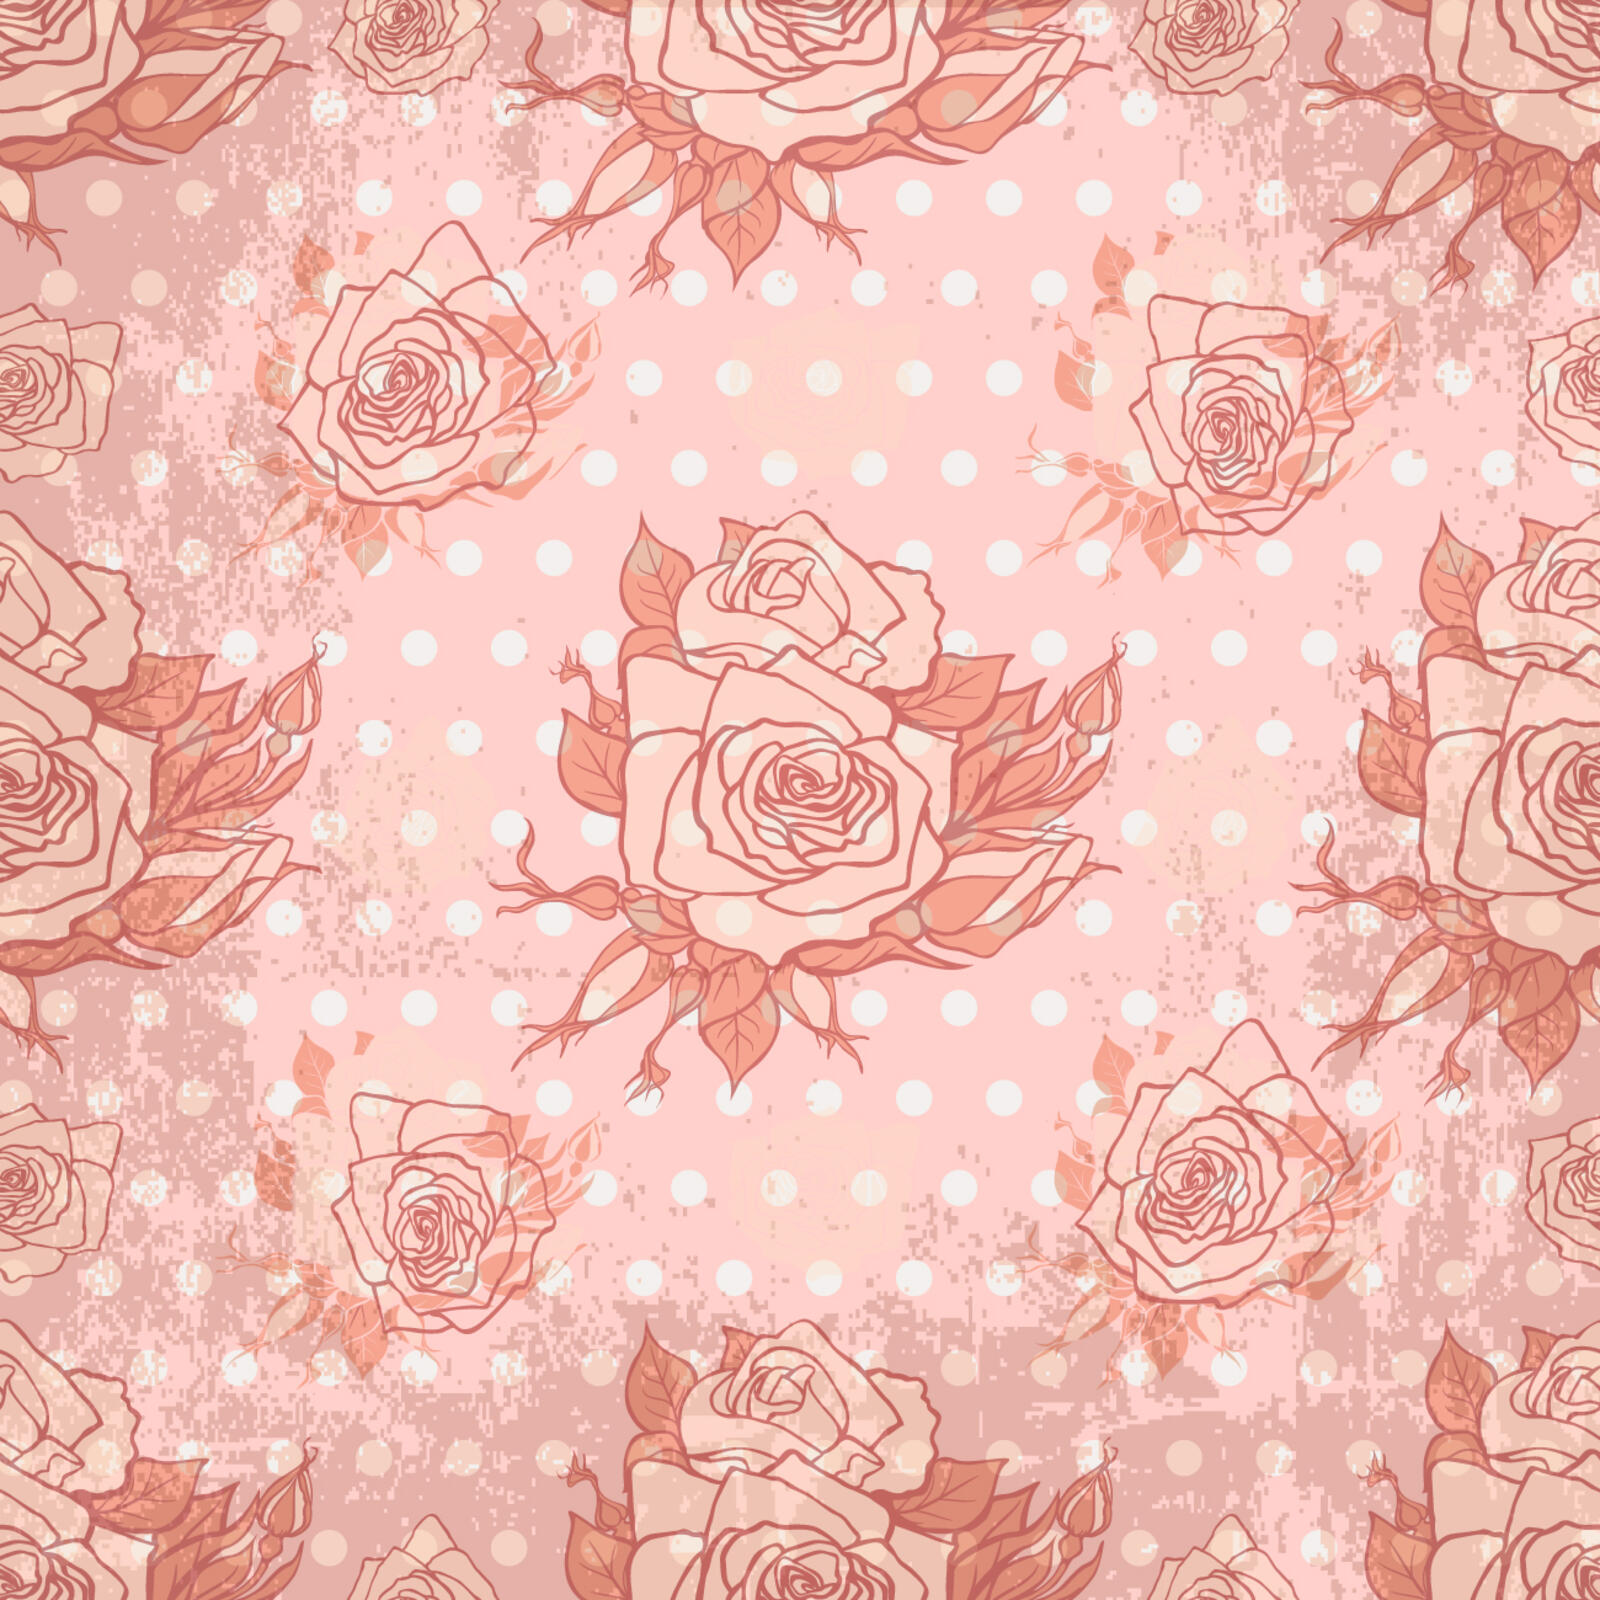 Wallpapers roses background textures on the desktop